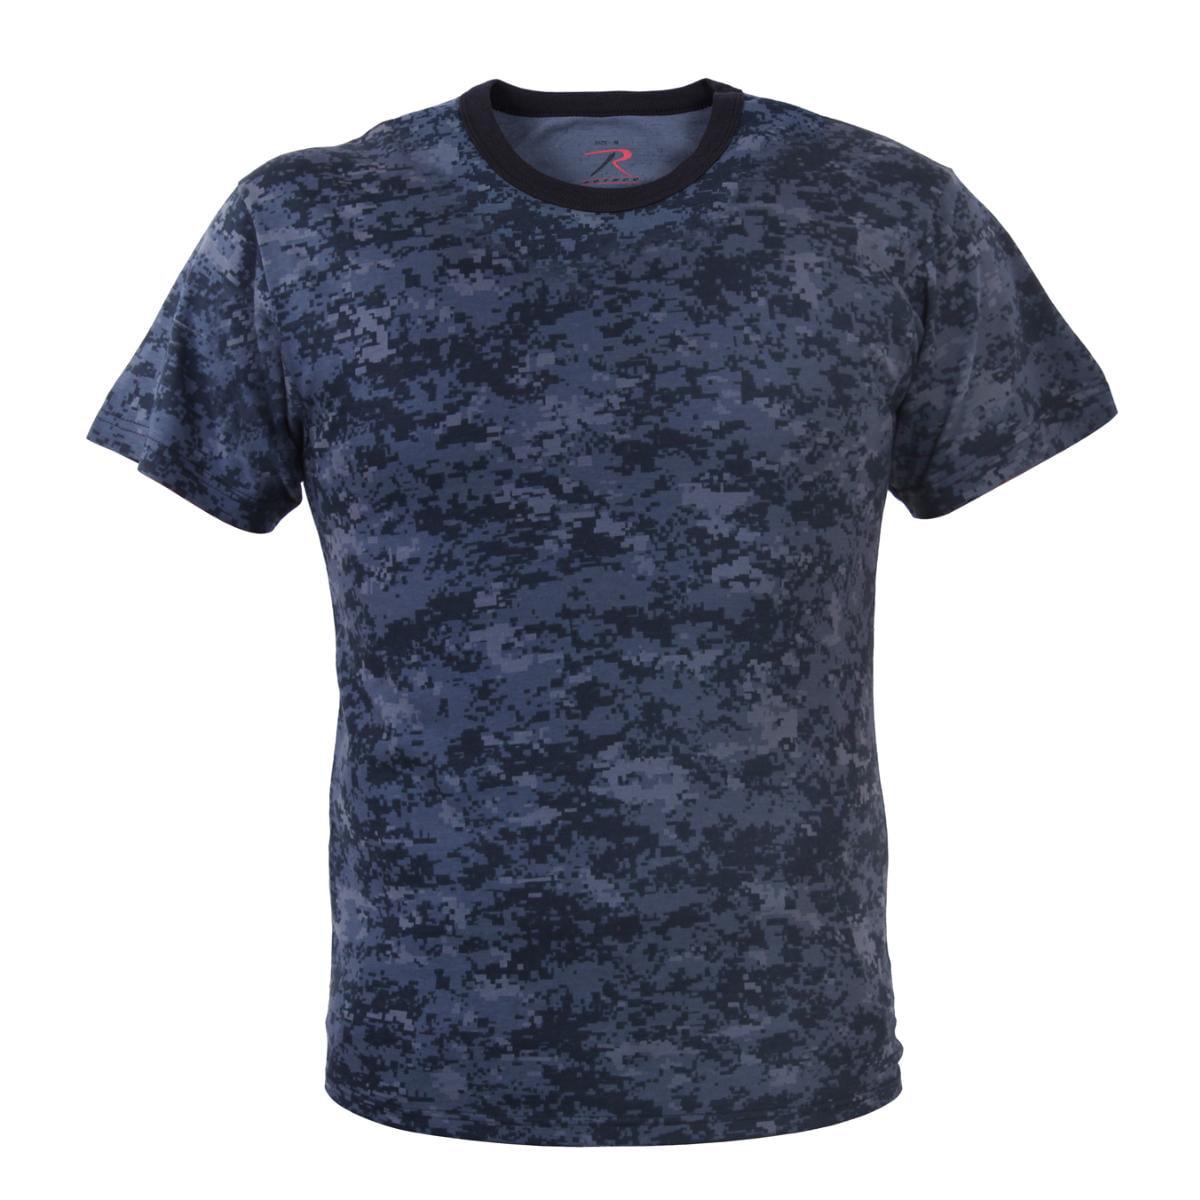 camouflage t shirt blue